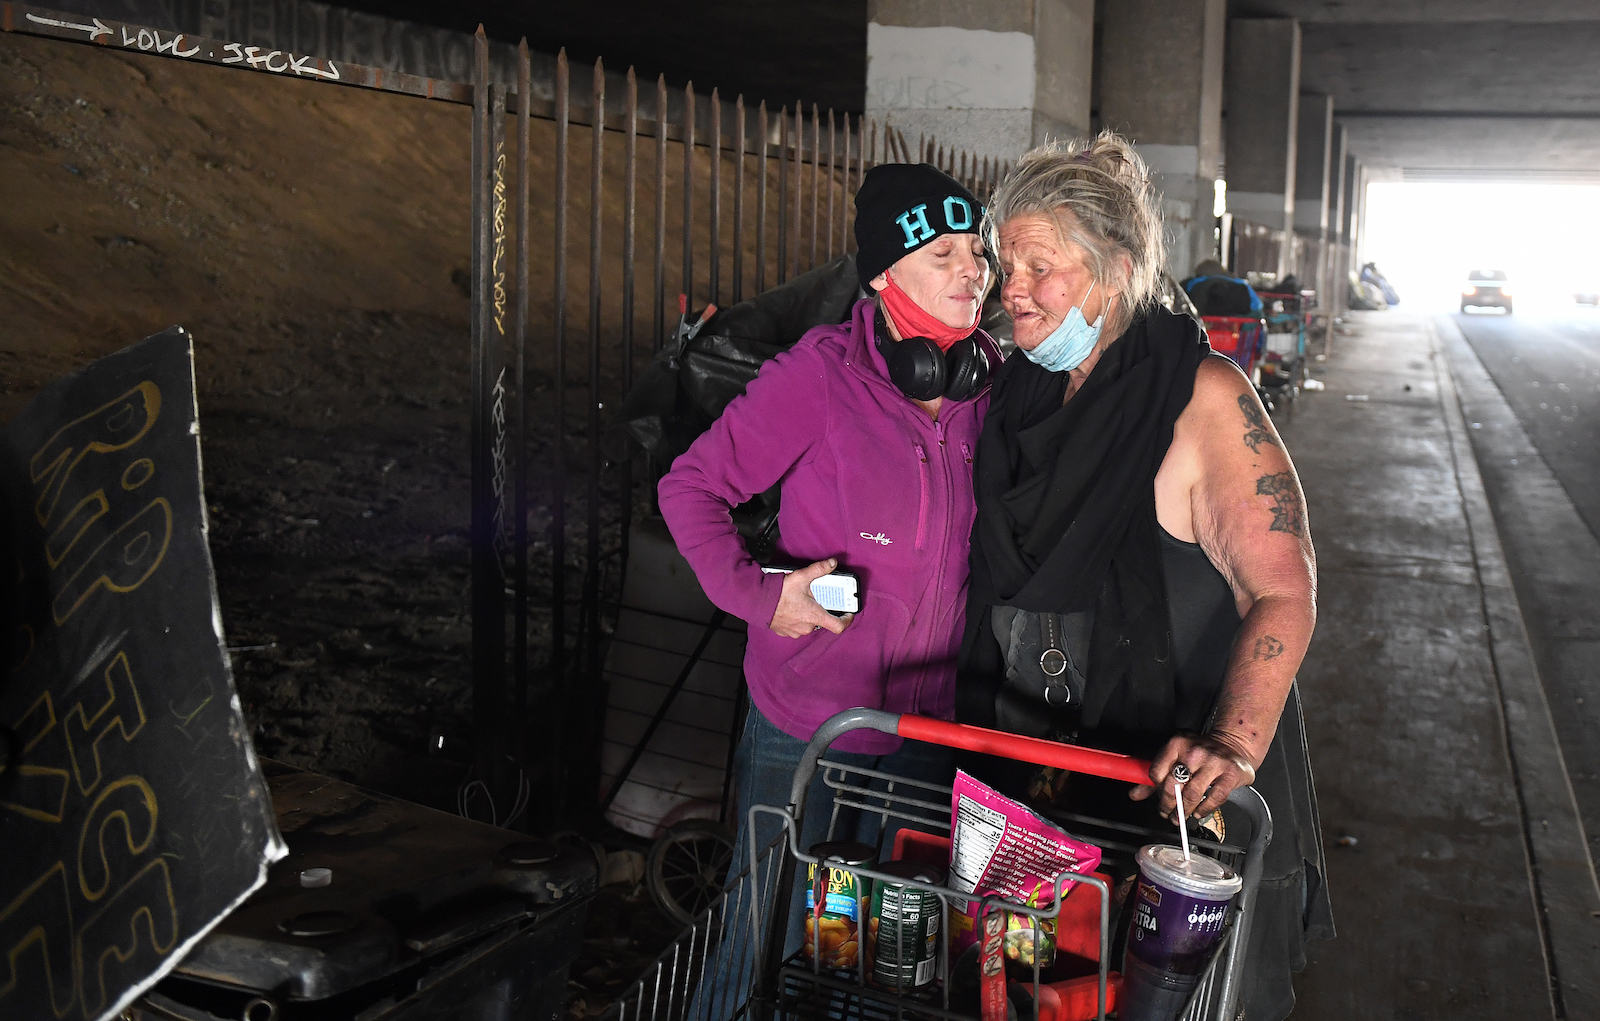 Unhoused women that both go by the name Dawn embrace as they get kicked out of a homeless encampment under the 405 freeway in Inglewood Tuesday morning as work crews clean-up personal belongings and trash in preparation for the Super Bowl.